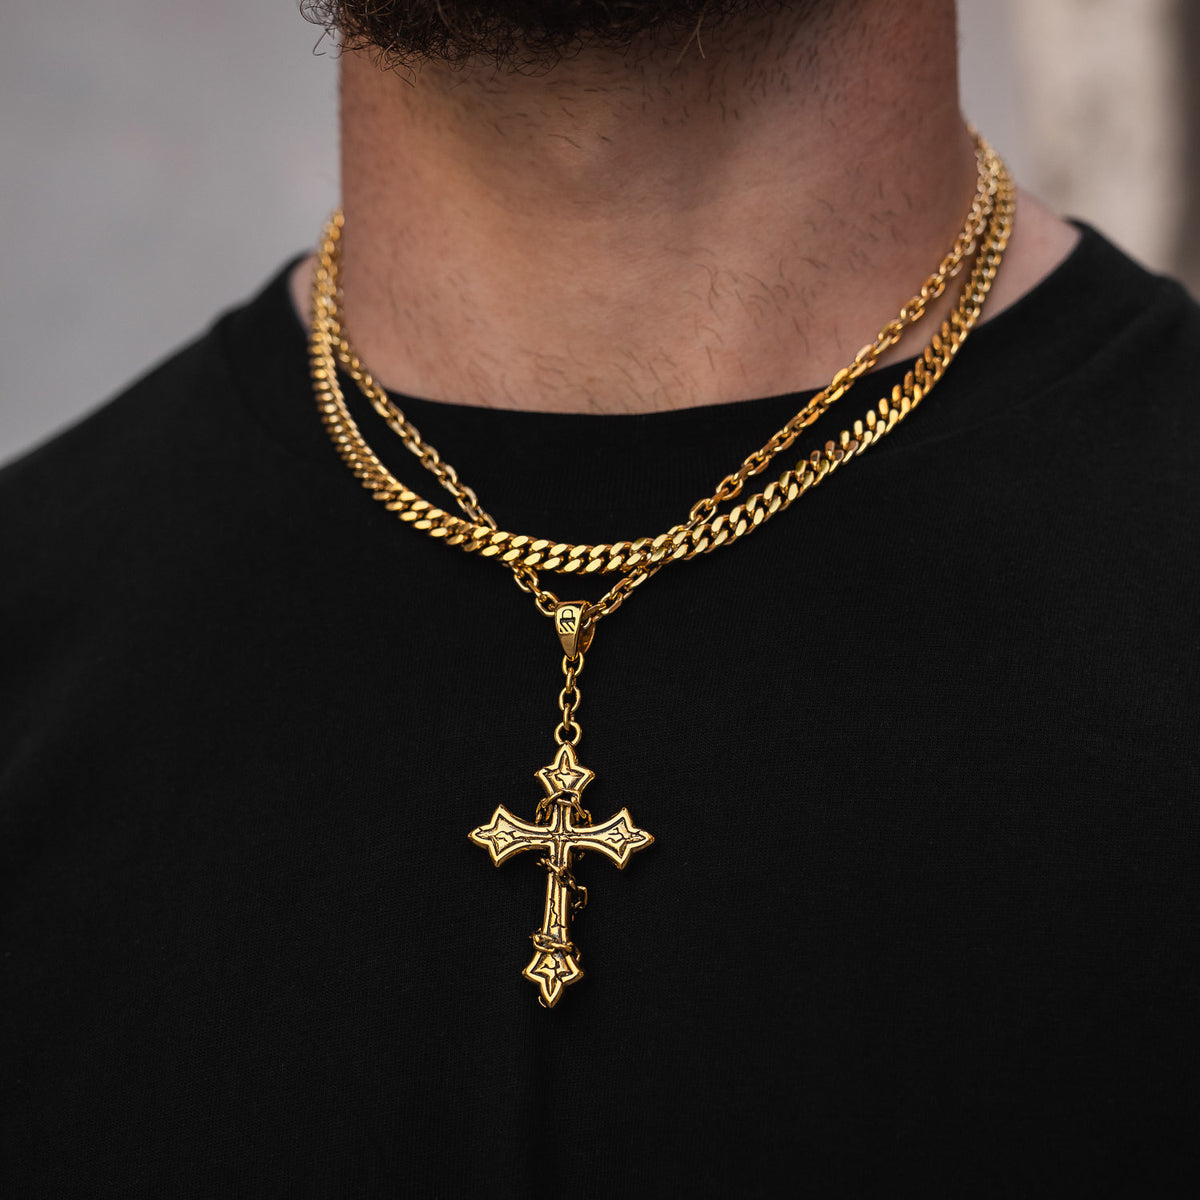 gold cross necklace set with chain by statement